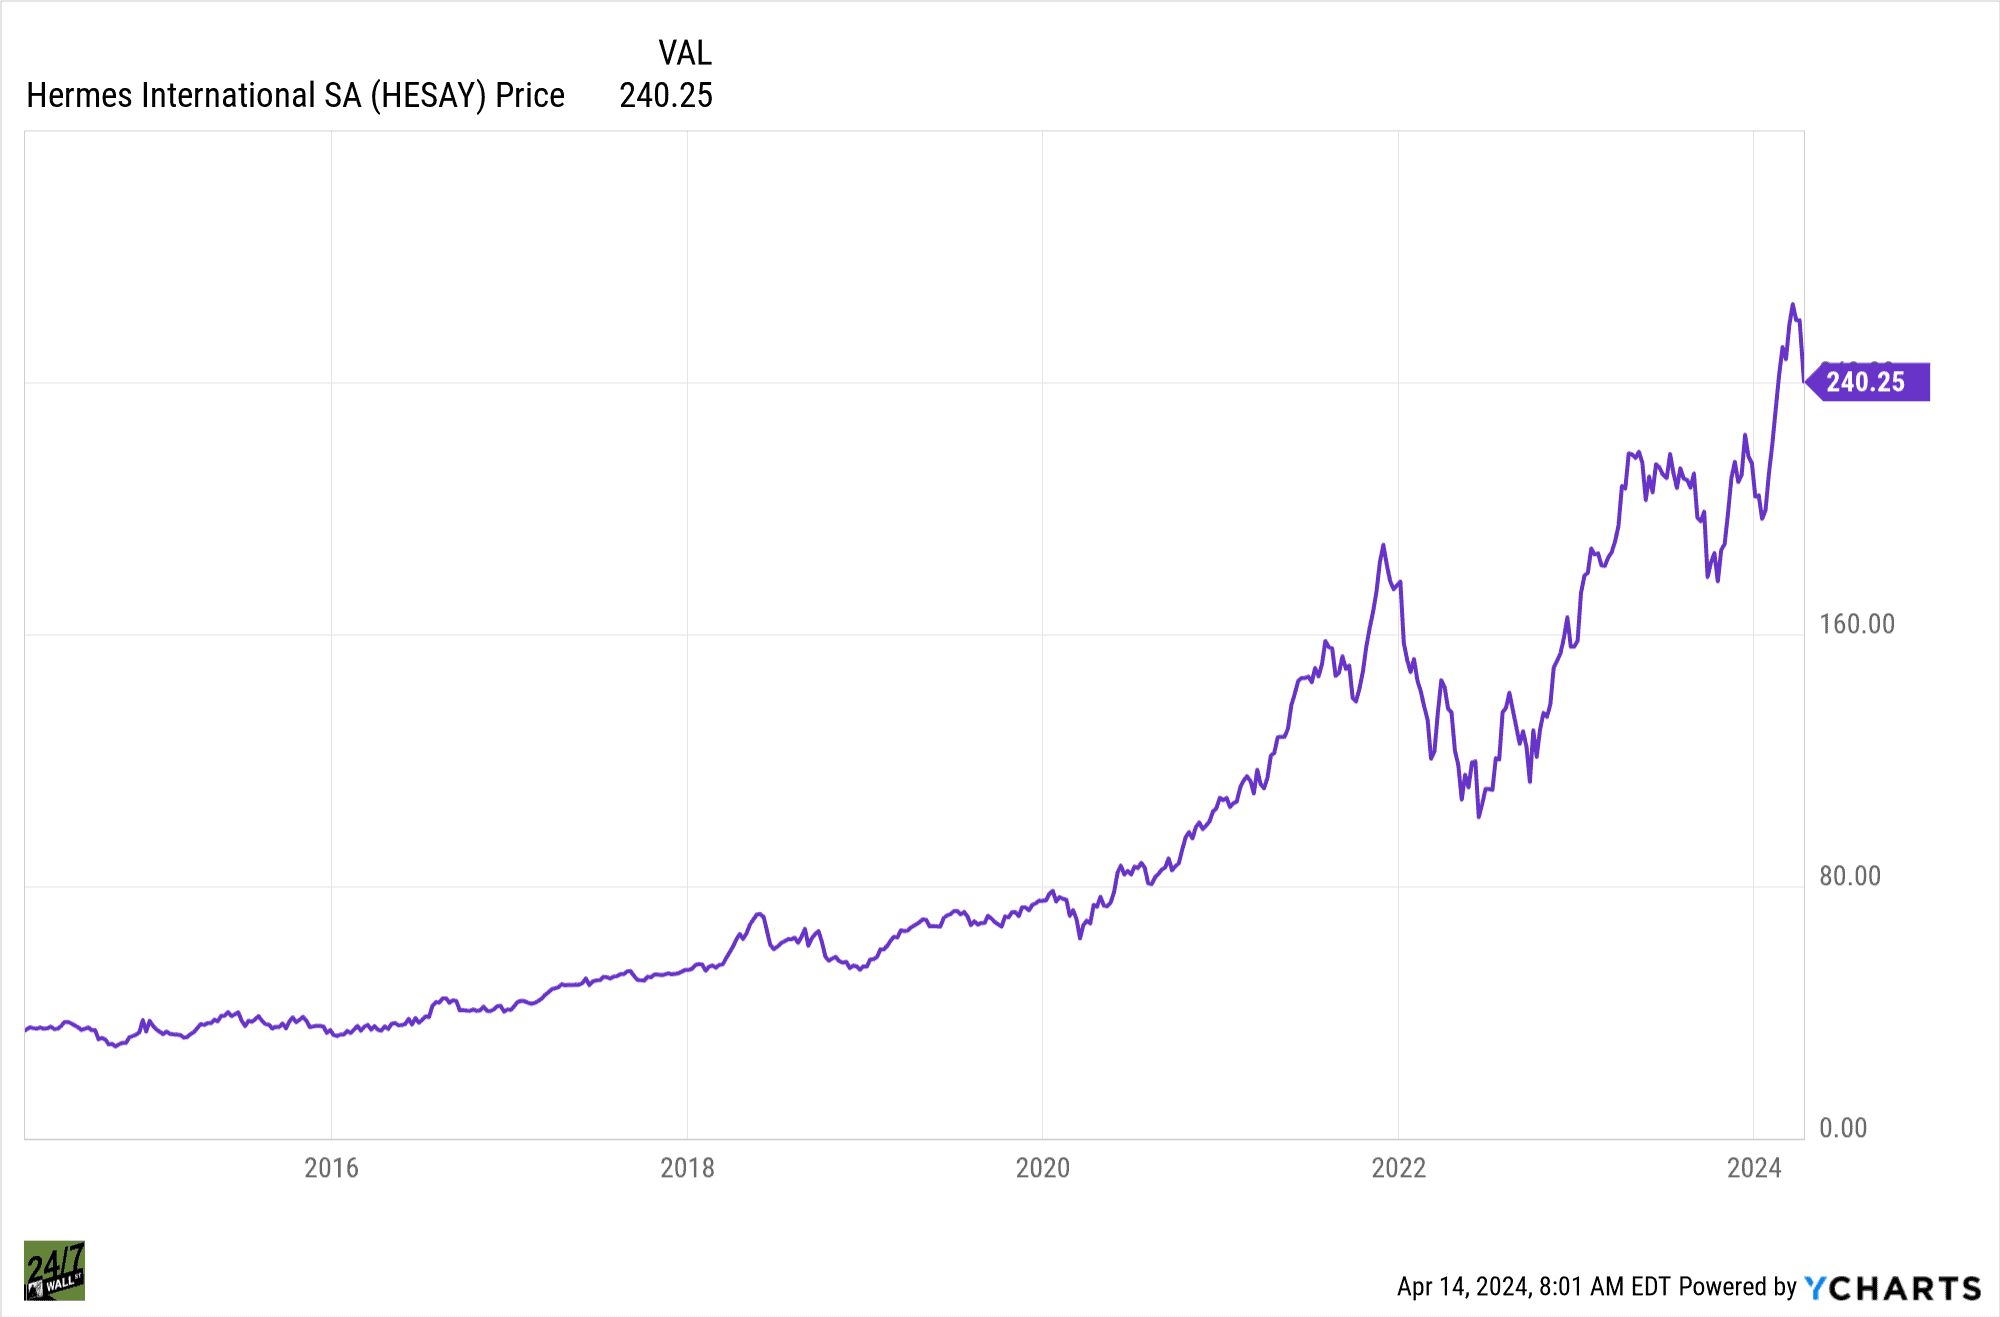 10 Year stock chart for Hermes